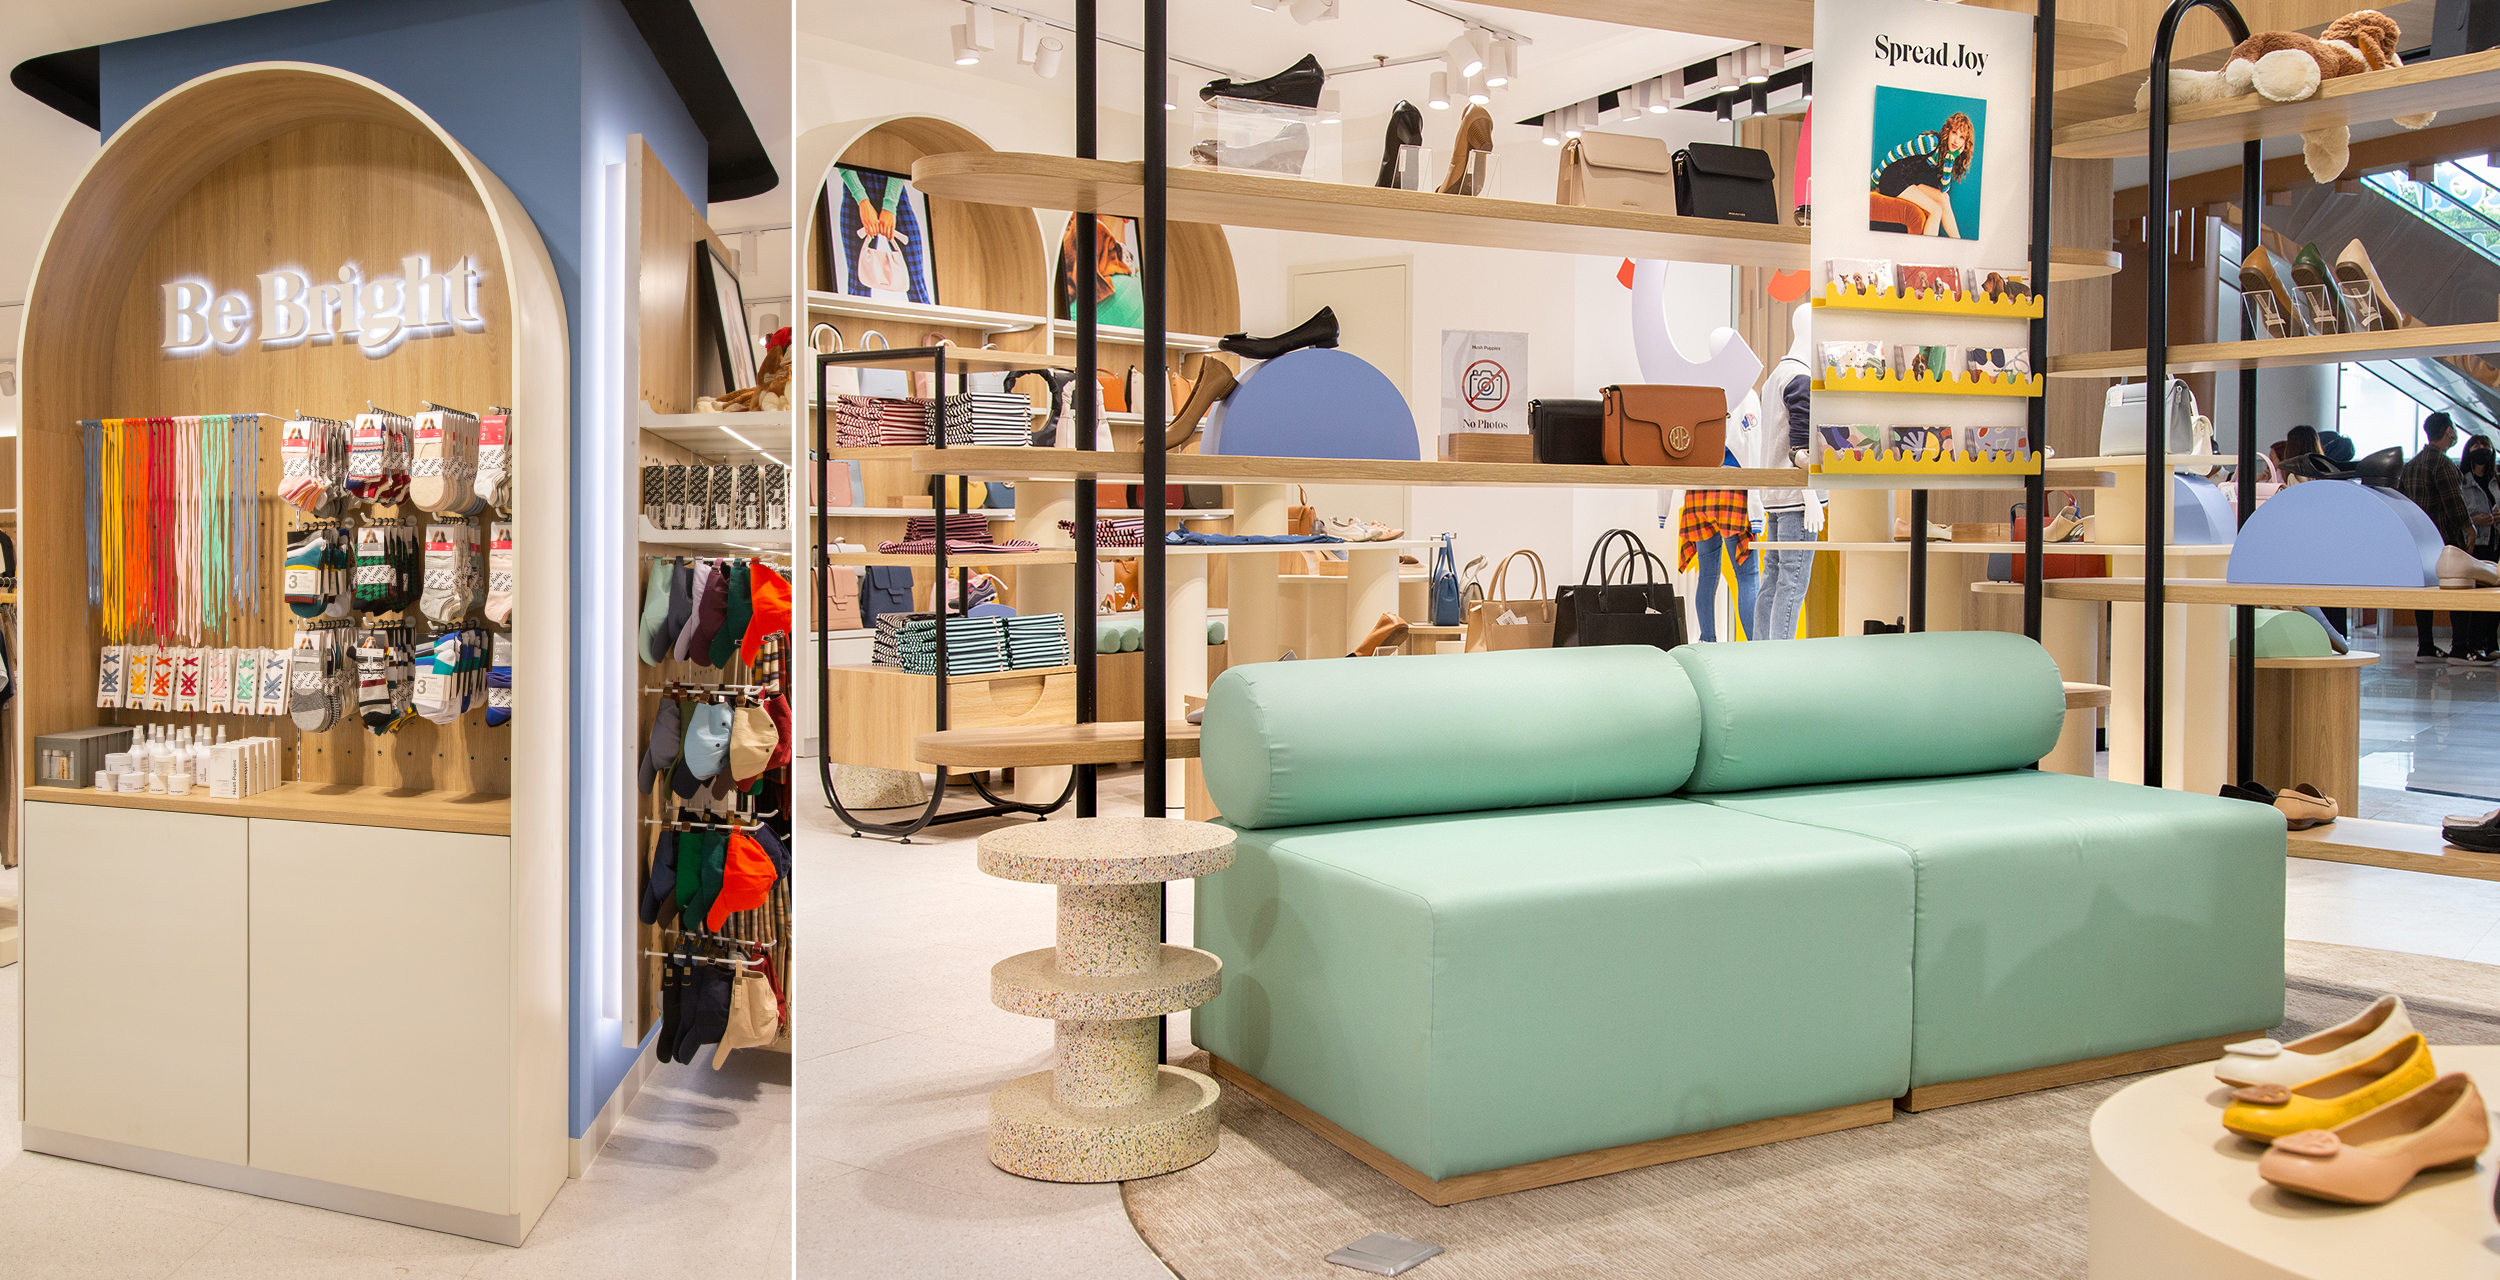 Footwear Stores Are Embracing New Trends to Capture Customers